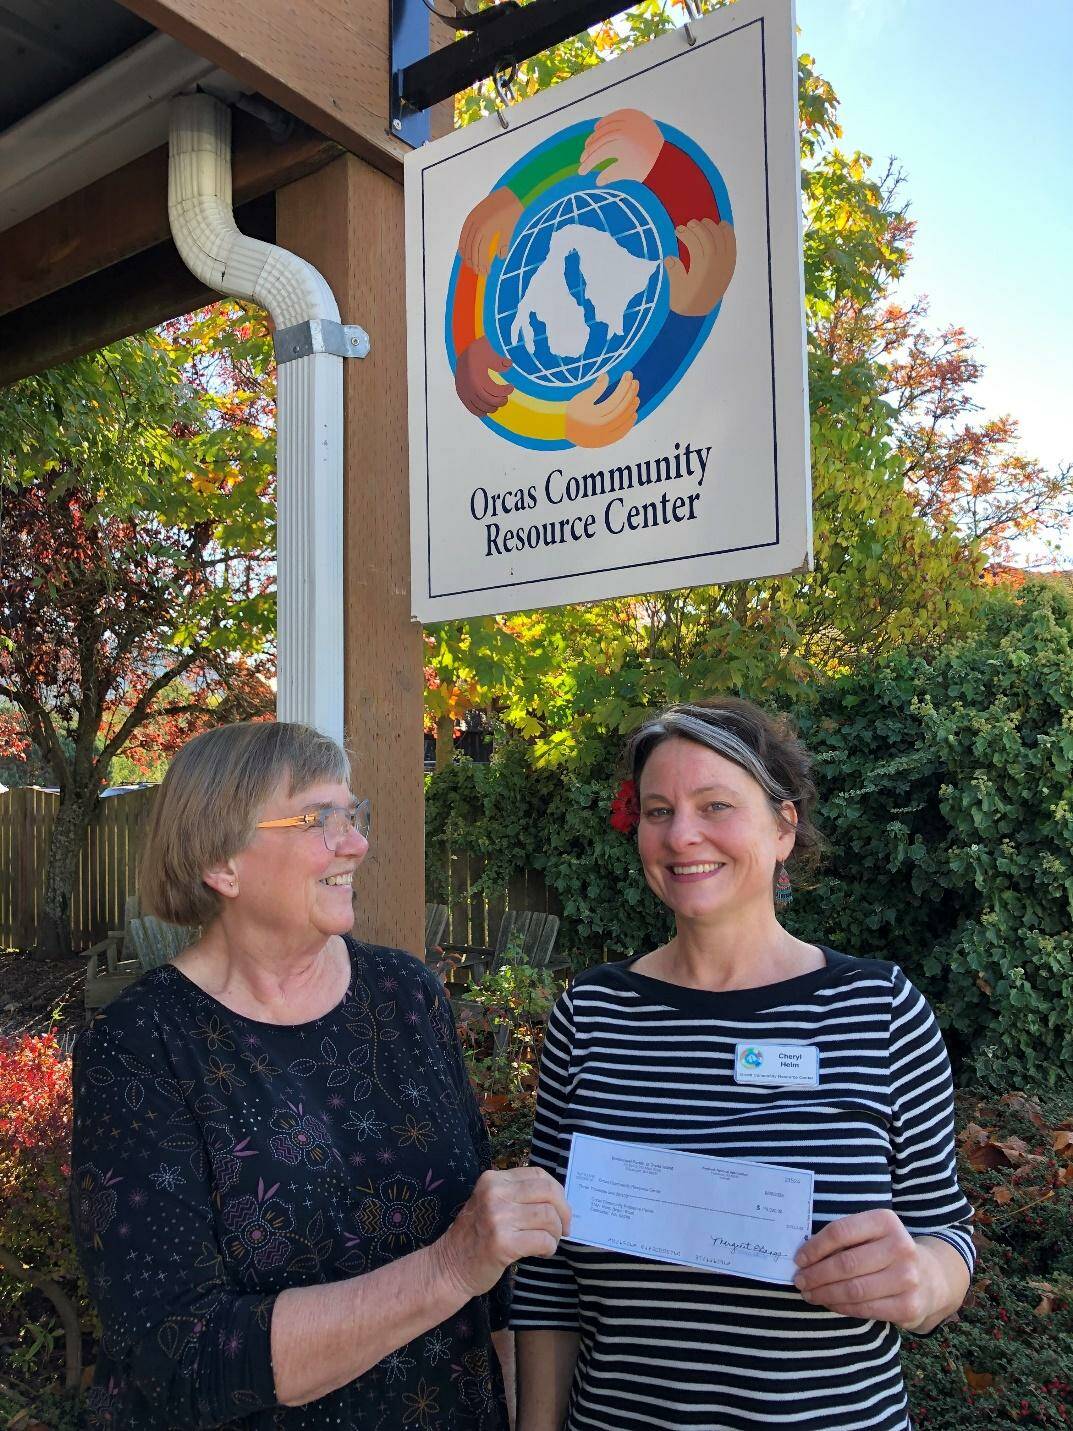 Margie Bangs photo.
Cheryl Helm (right), Housing Support Specialist, receives Market Day proceeds for the Orcas Community Resource Center from Lynn Baker, Emmanuel parishioner.